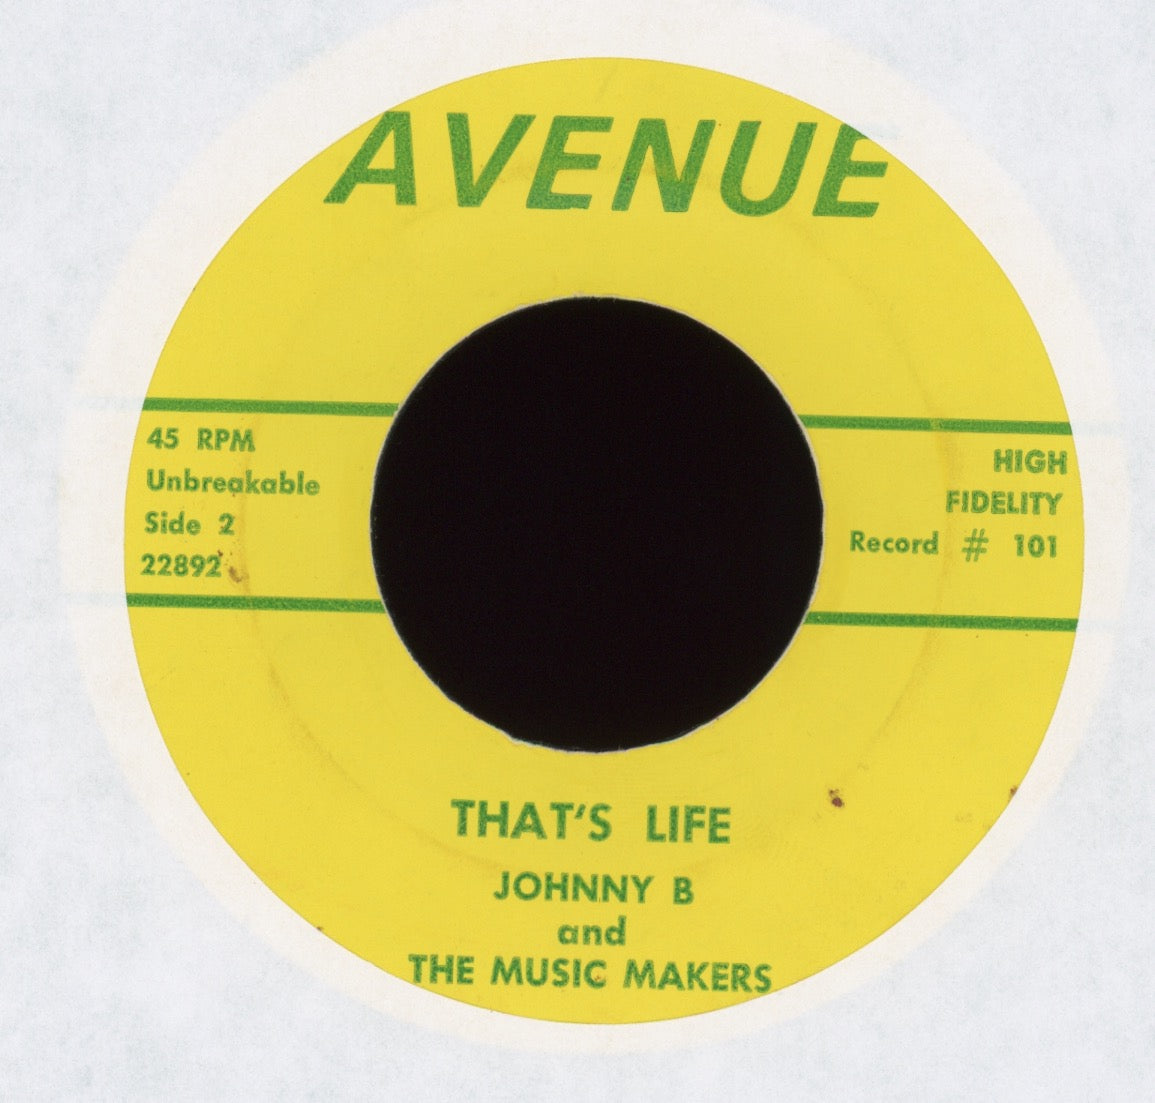 Johnny B & The Music Makers - Unchain My Heart on Avenue Rite Press